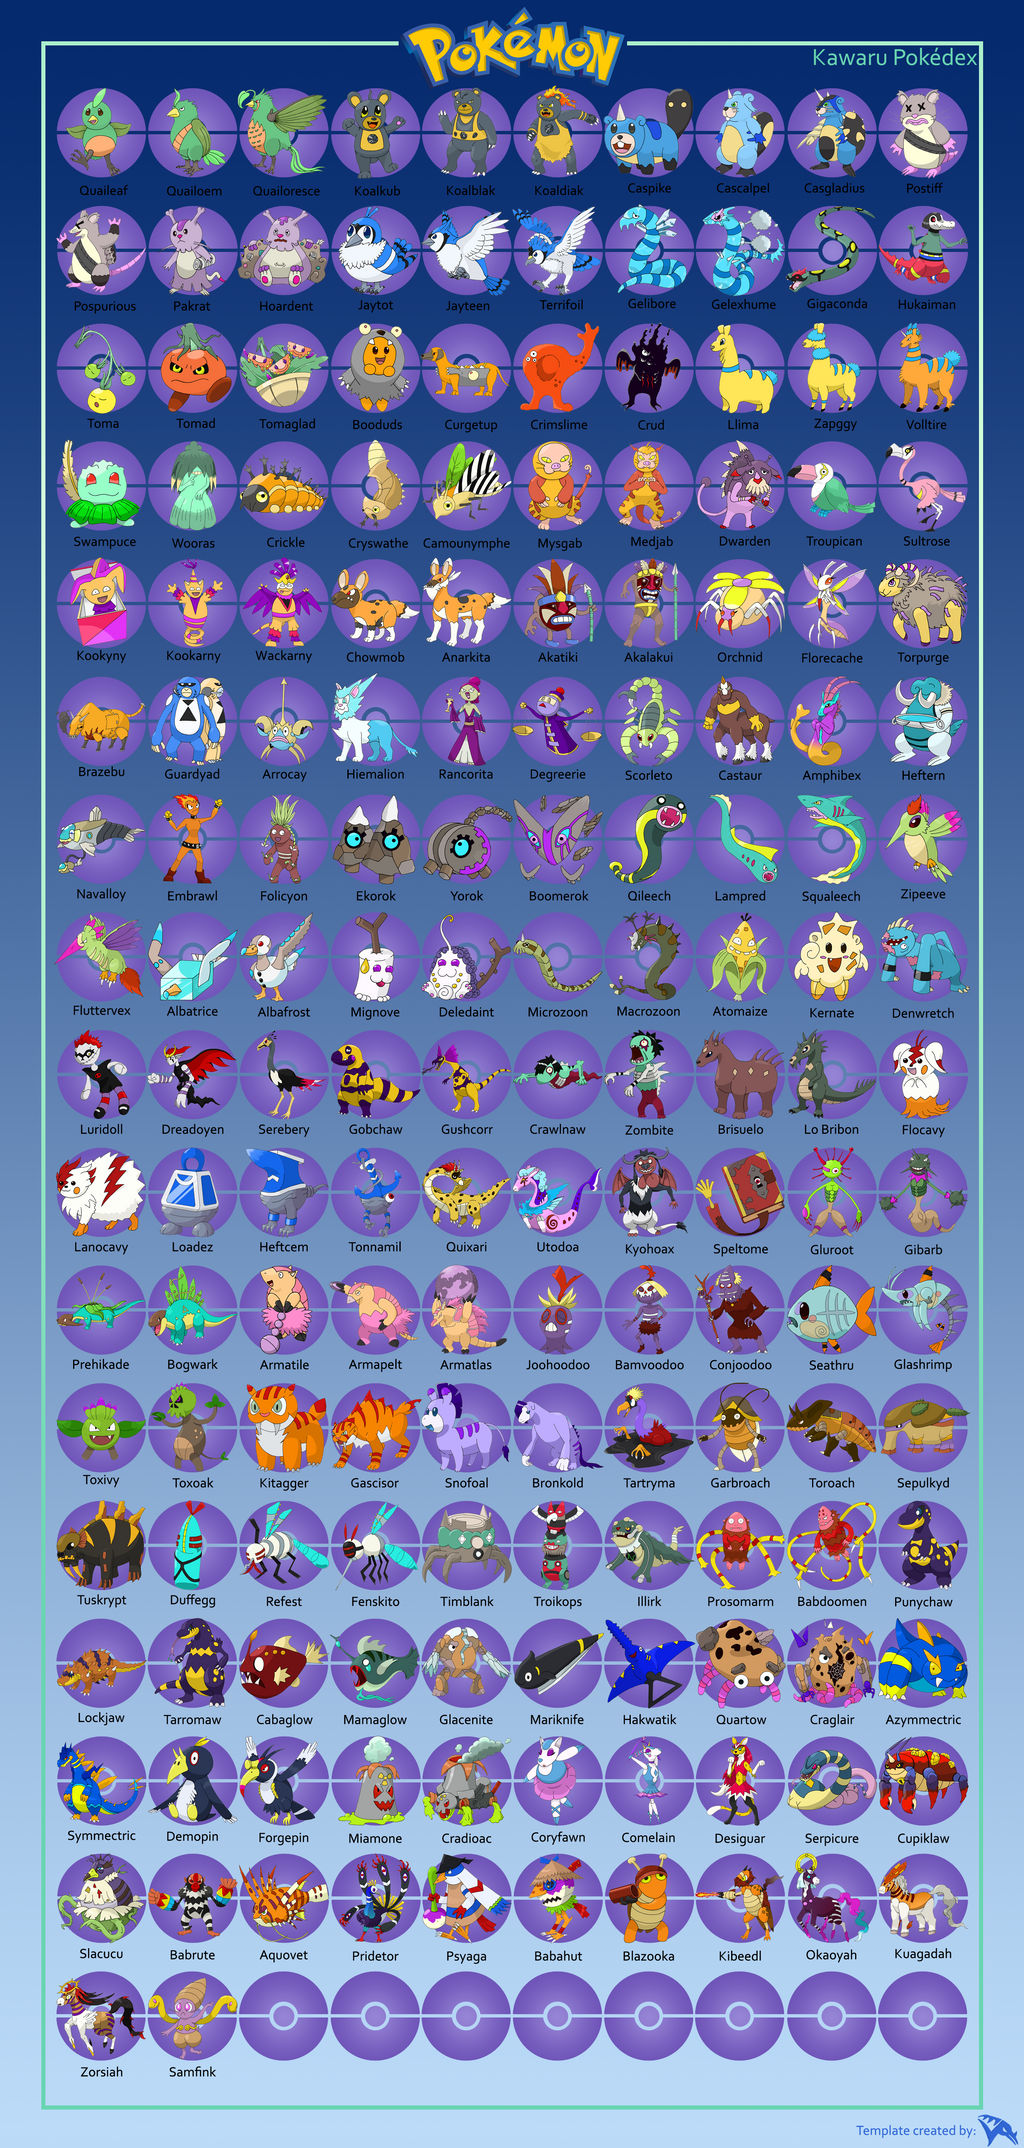 Is it possible to complete the Pokedex in Pokémon Go?